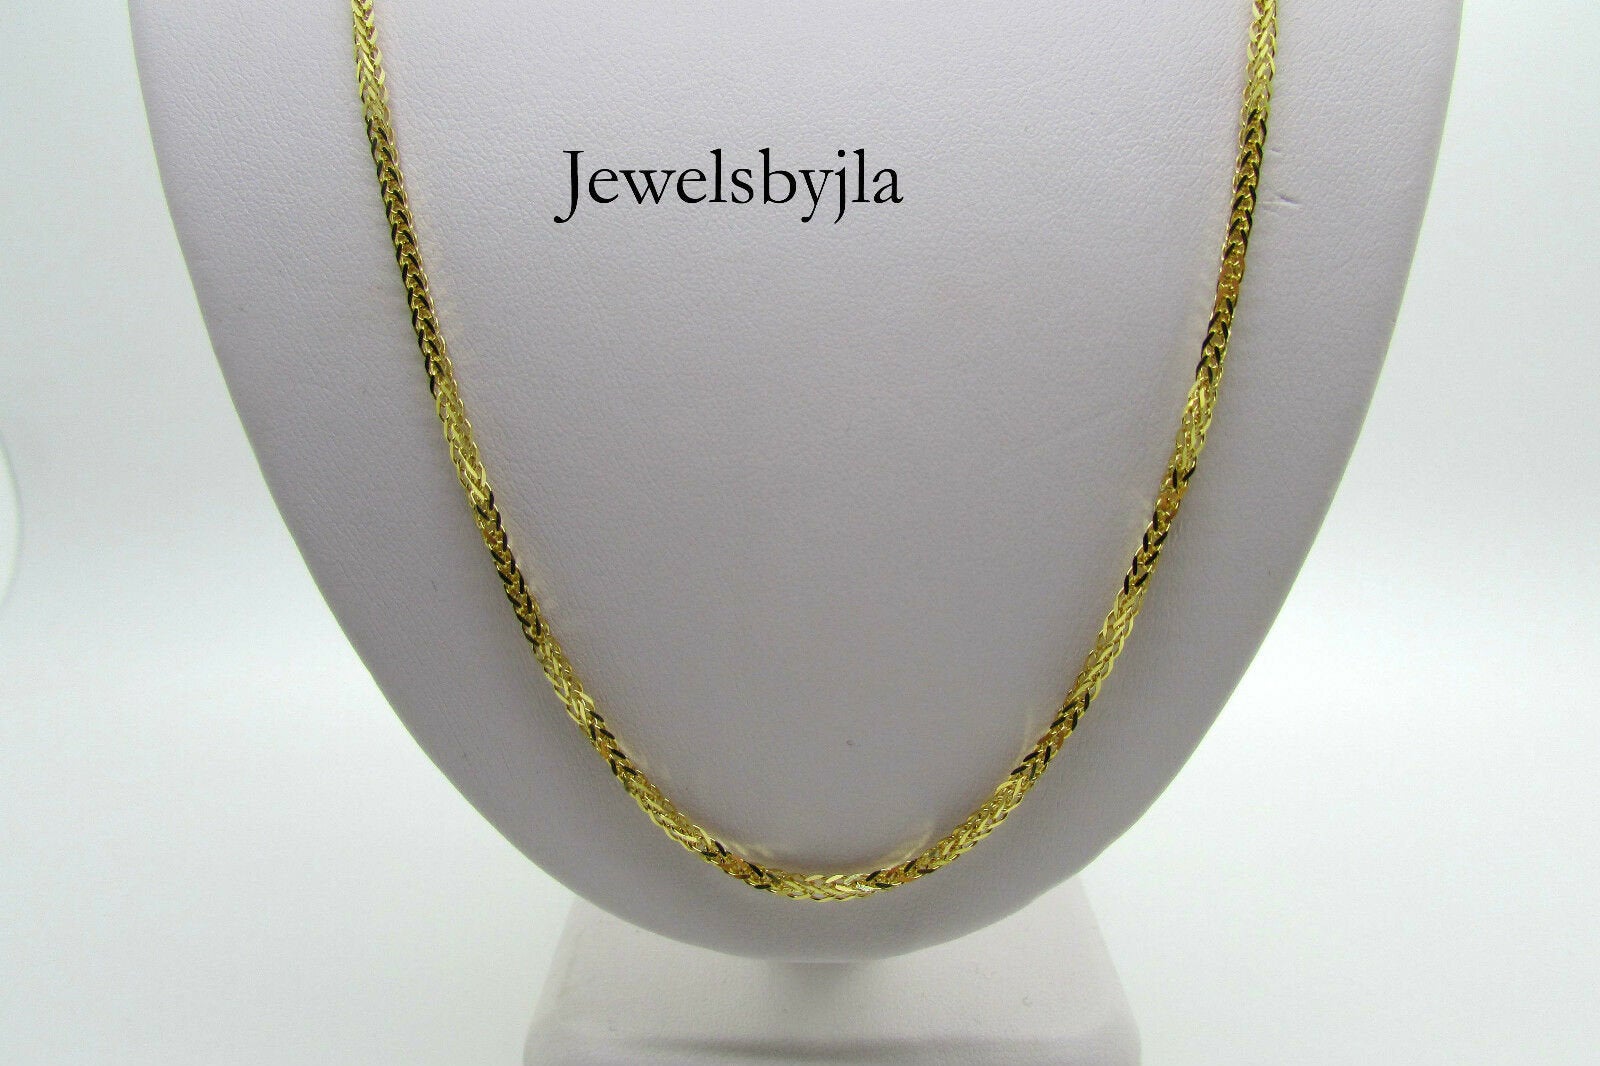 030 Gauge Diamond-Cut Foxtail Chain Necklace in Sterling Silver - 22